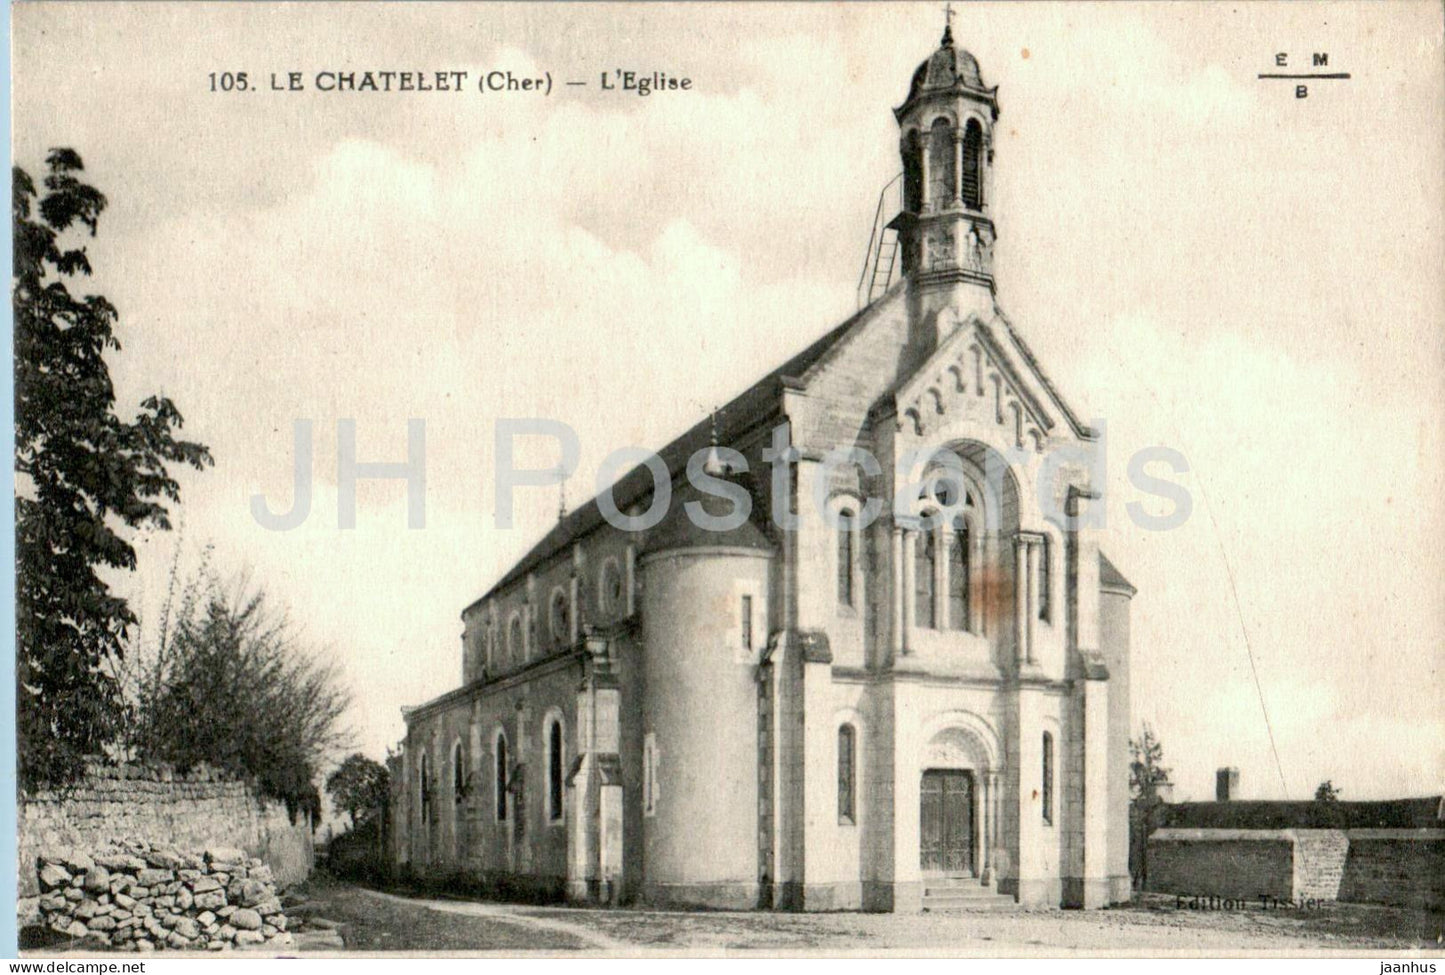 Le Chatelet - L'Eglise - church - 105 - old postcard - 1929 - France - used - JH Postcards